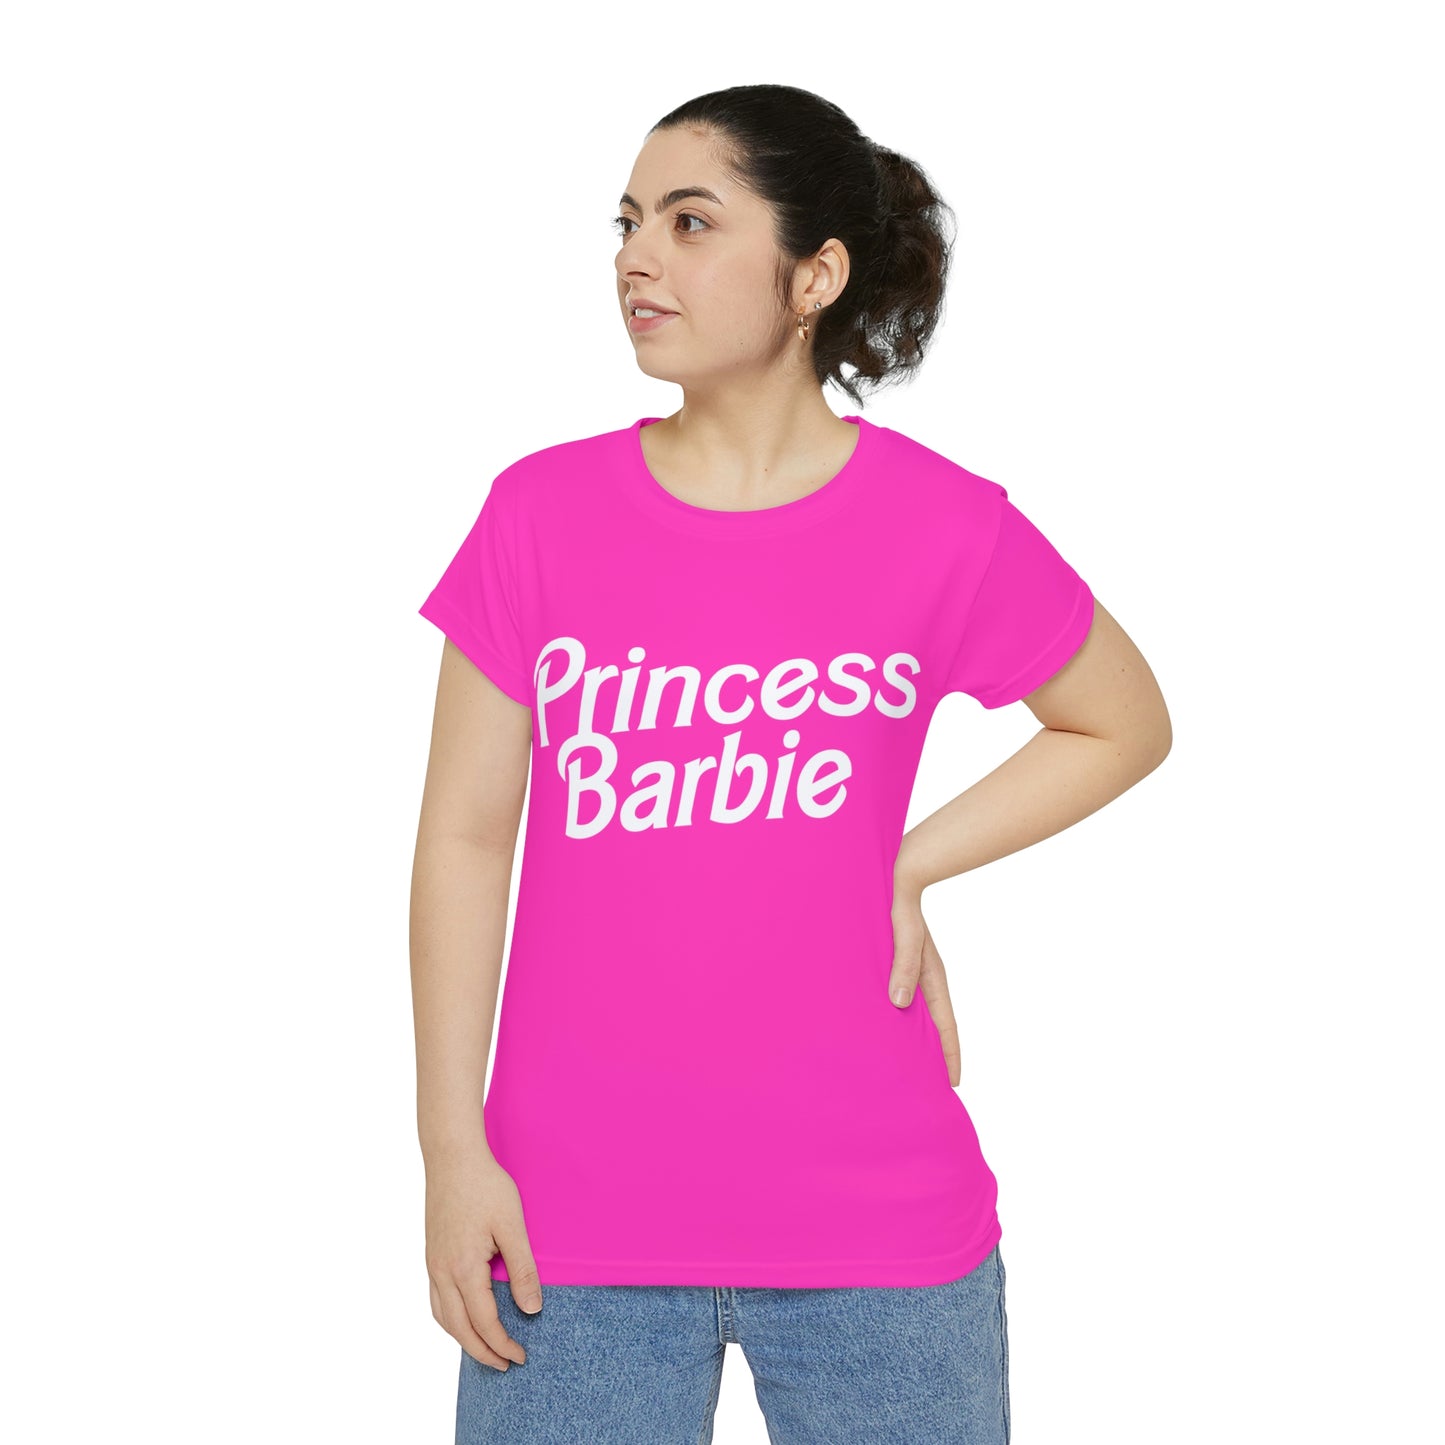 Princess Barbie, Bachelorette Party Shirts, Bridesmaid Gifts, Here comes the Party Tees, Group Party Favor Shirts, Bridal Party Shirt for women